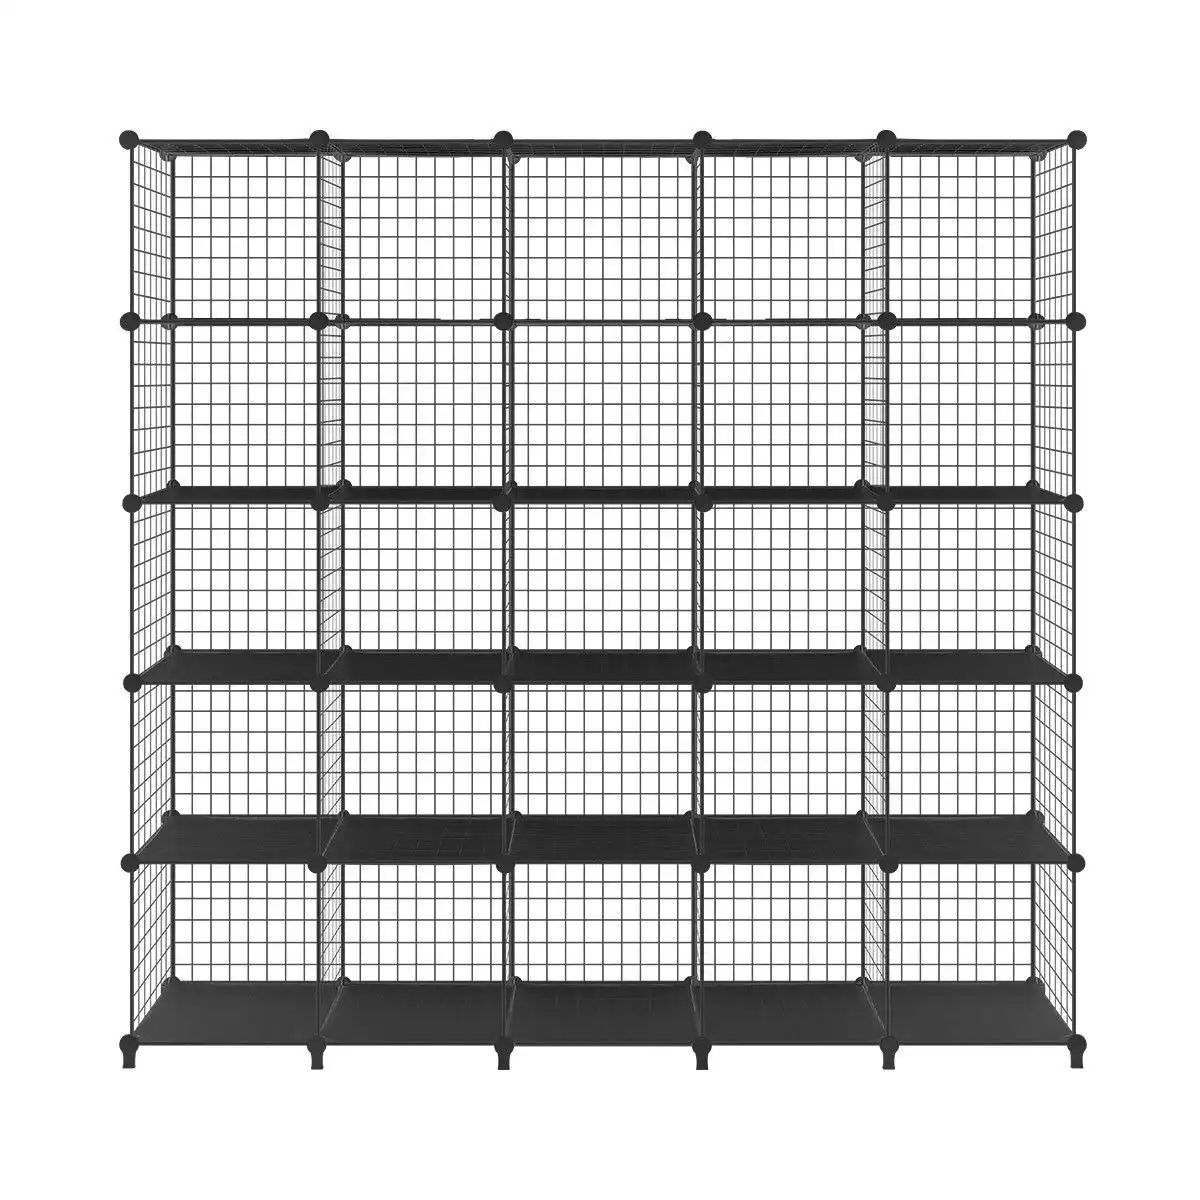 Ausway Metal Wire 25-Cube Storage Grid Organizer DIY Modular Cabinet for Toys Books Clothes Black